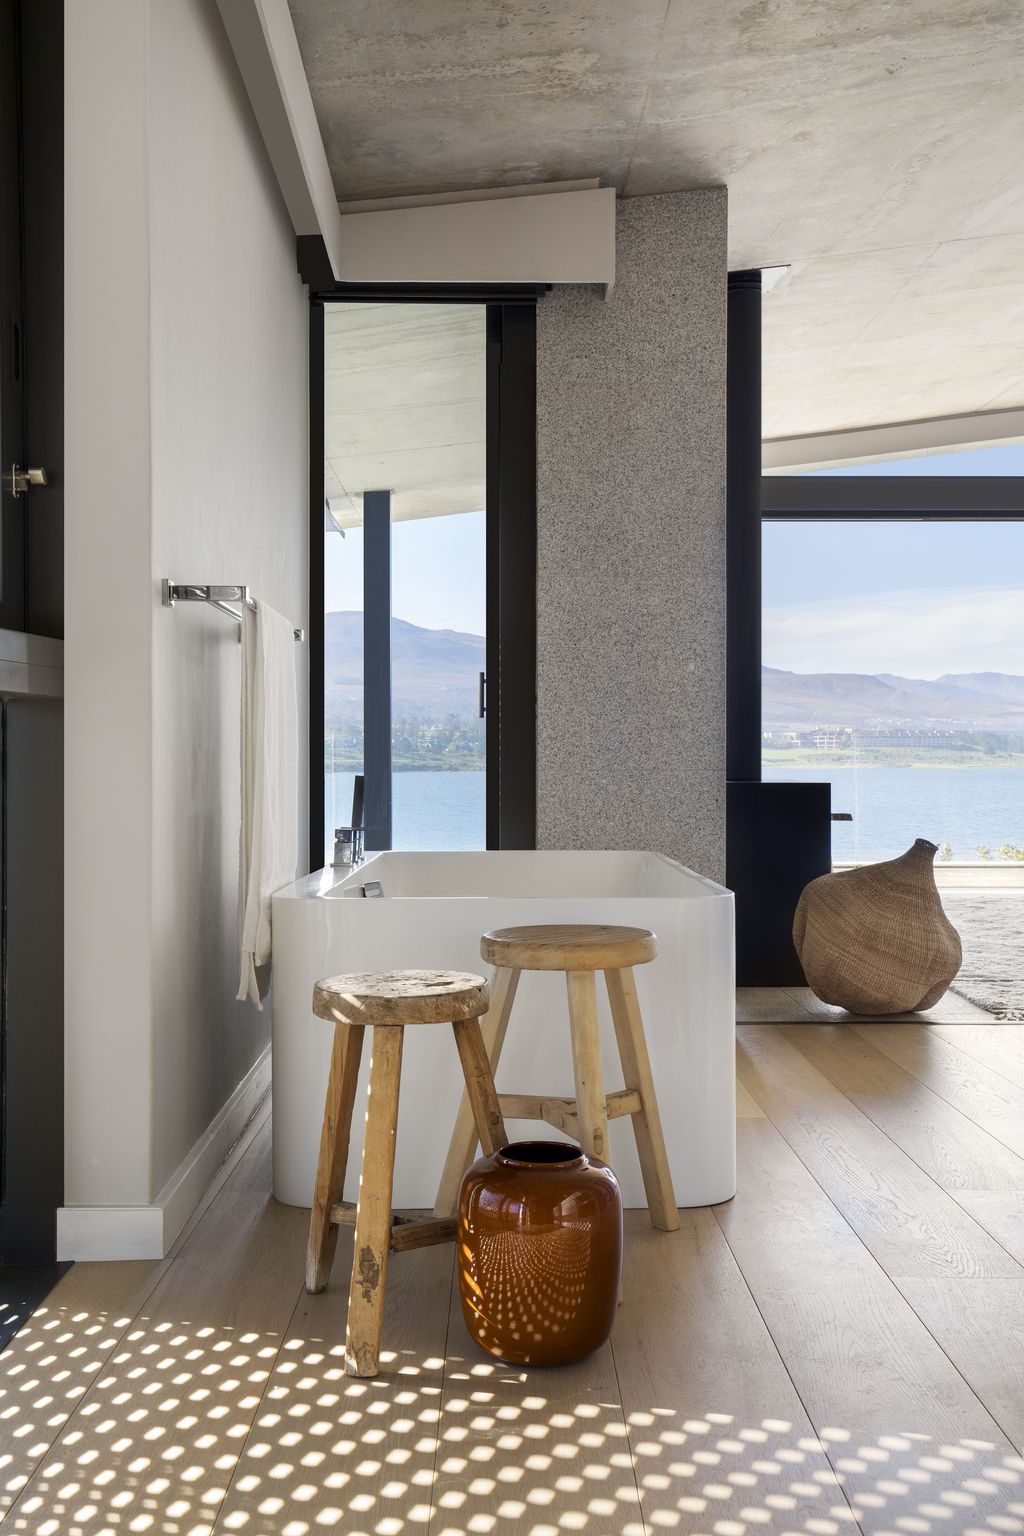 Panoramic Views of The Landscape with Benguela Cove House by SAOTA